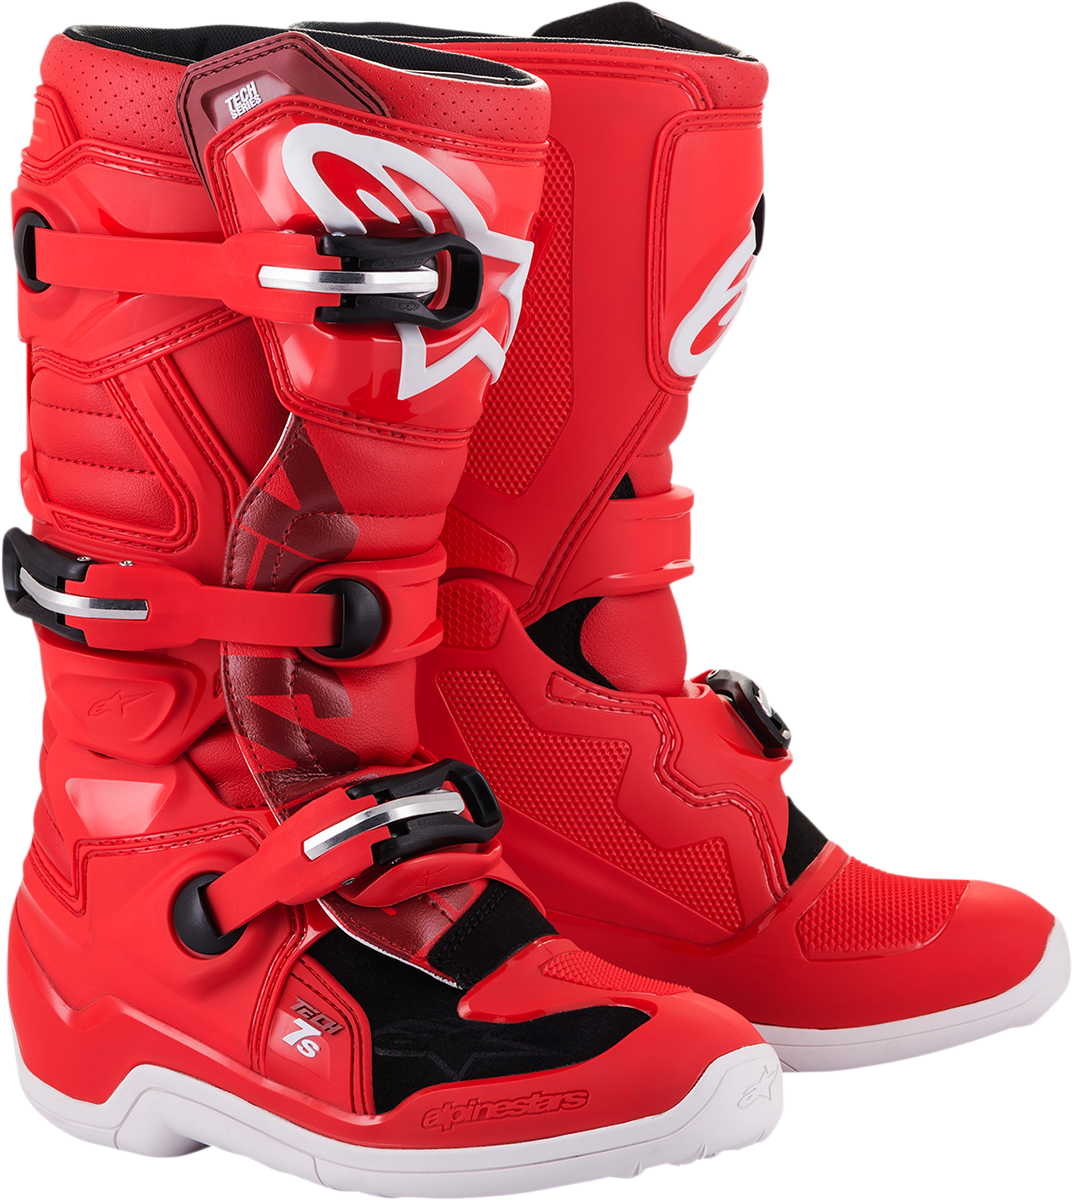 ALPINESTARS Youth Tech 7S Boots - Red - US 7 2015017-30-7